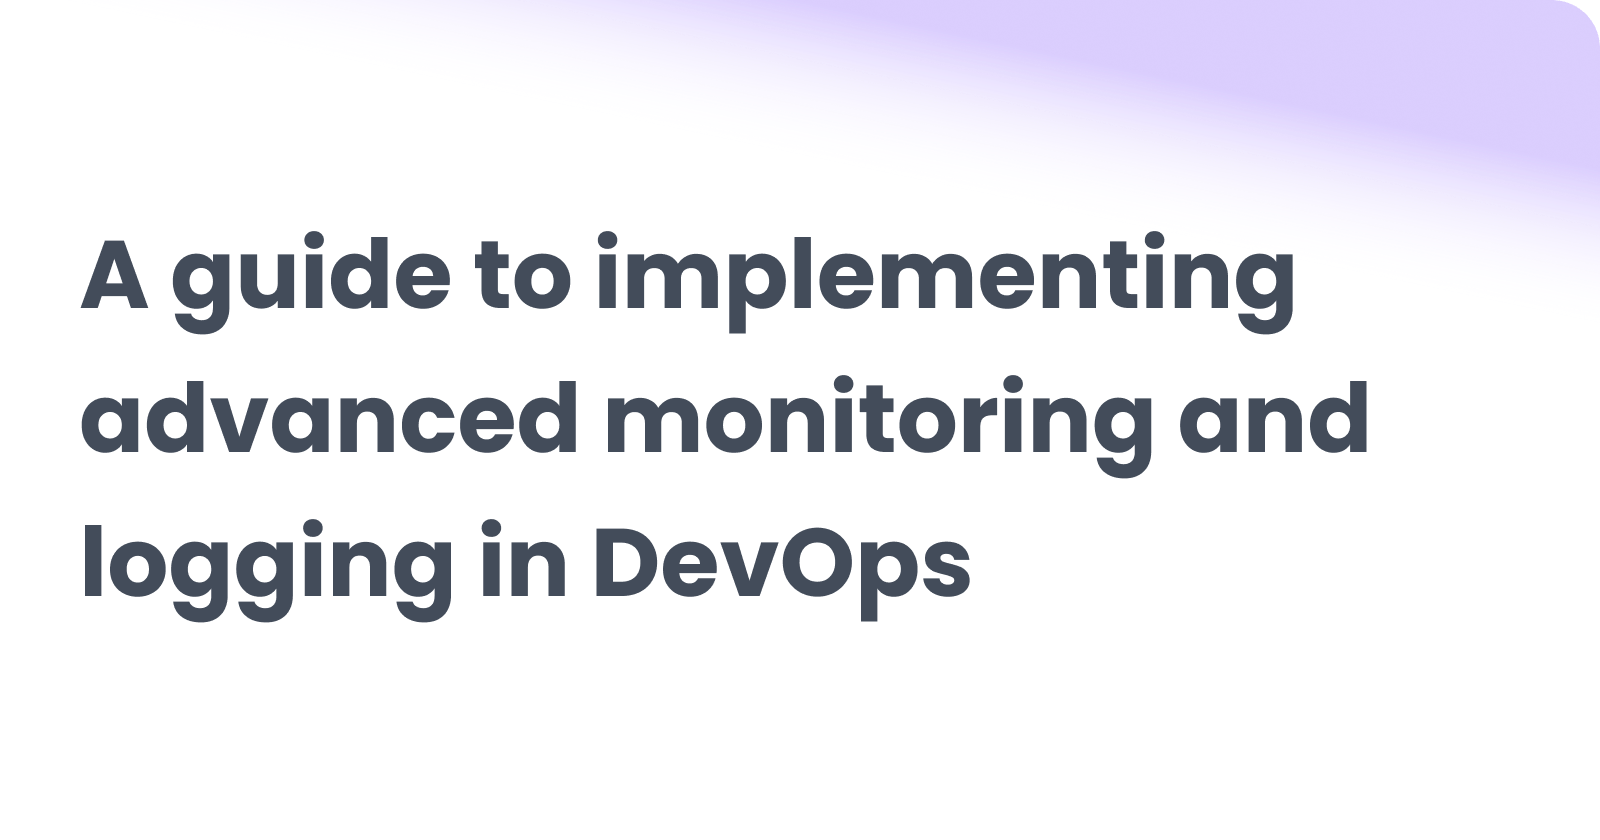 A guide to implementing advanced monitoring and logging in DevOps